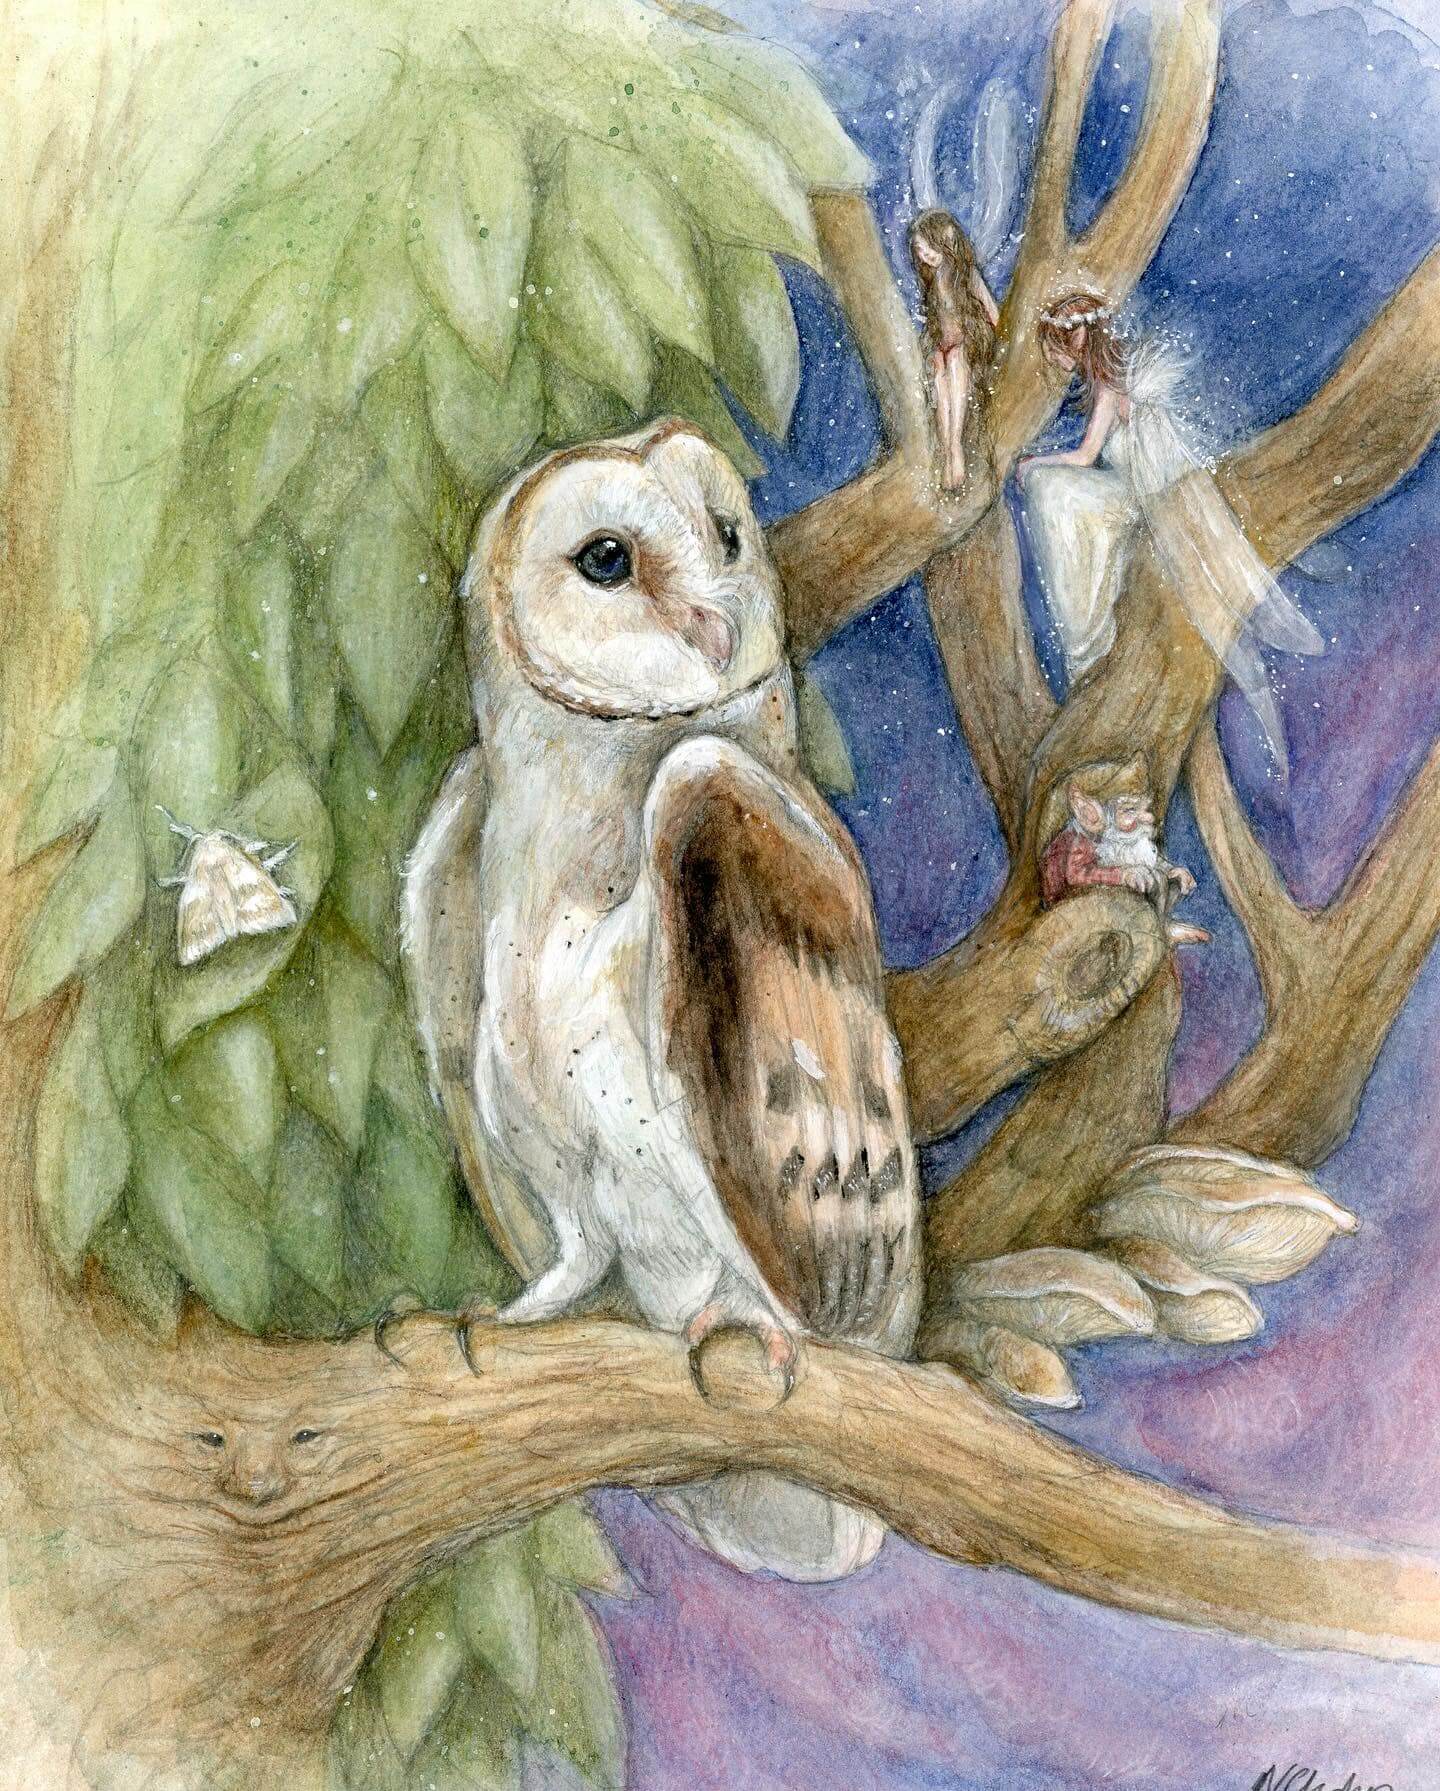 Painting in watercolors representing a owl sitting on a tree branch and looking at a very small fairy. In the background, on another branch of the tree, sit a small imp-like man.